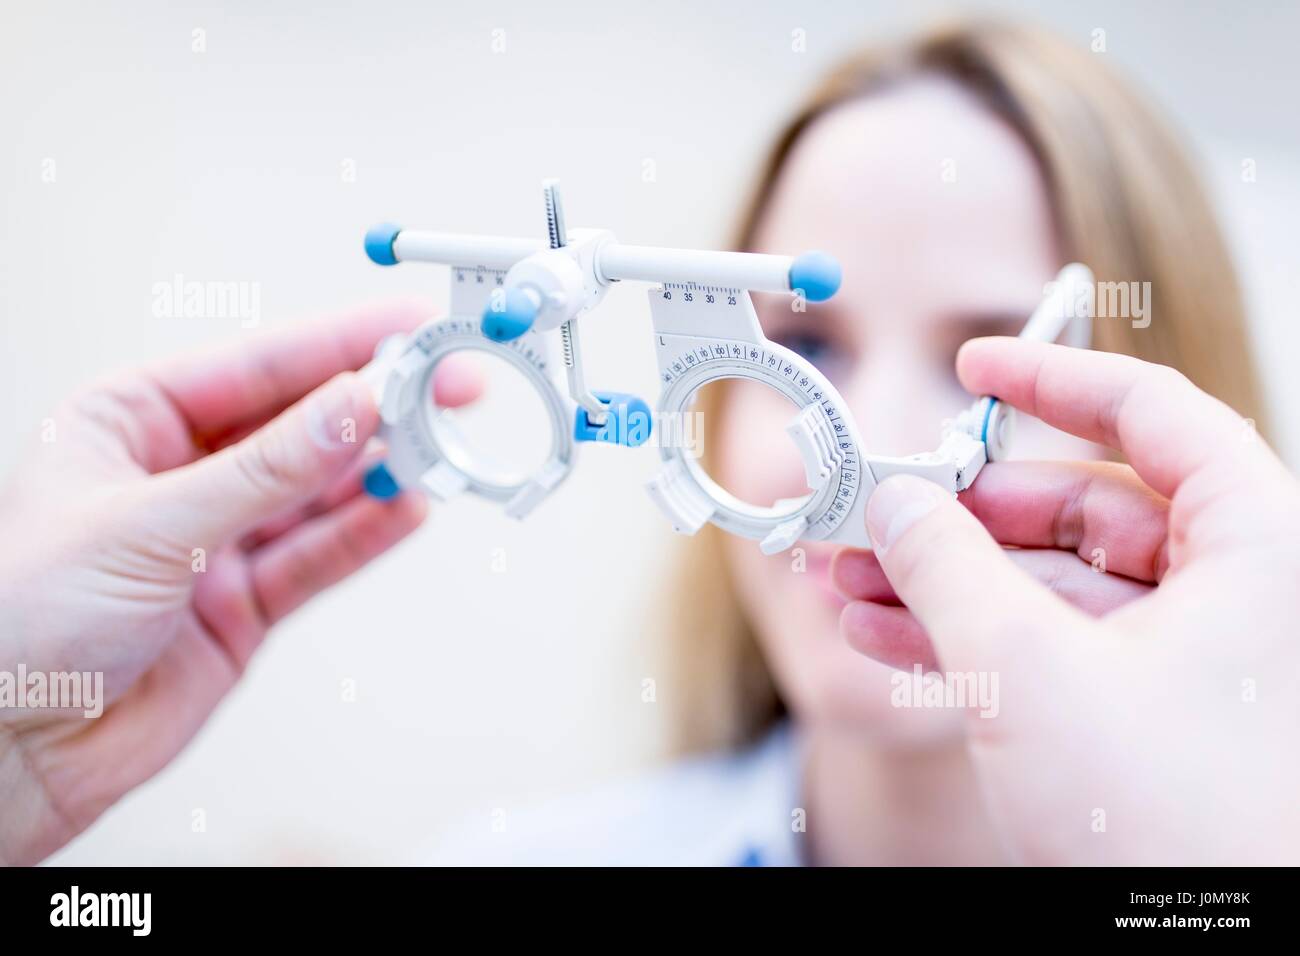 Young woman having eye exam performed by optometrist. Stock Photo